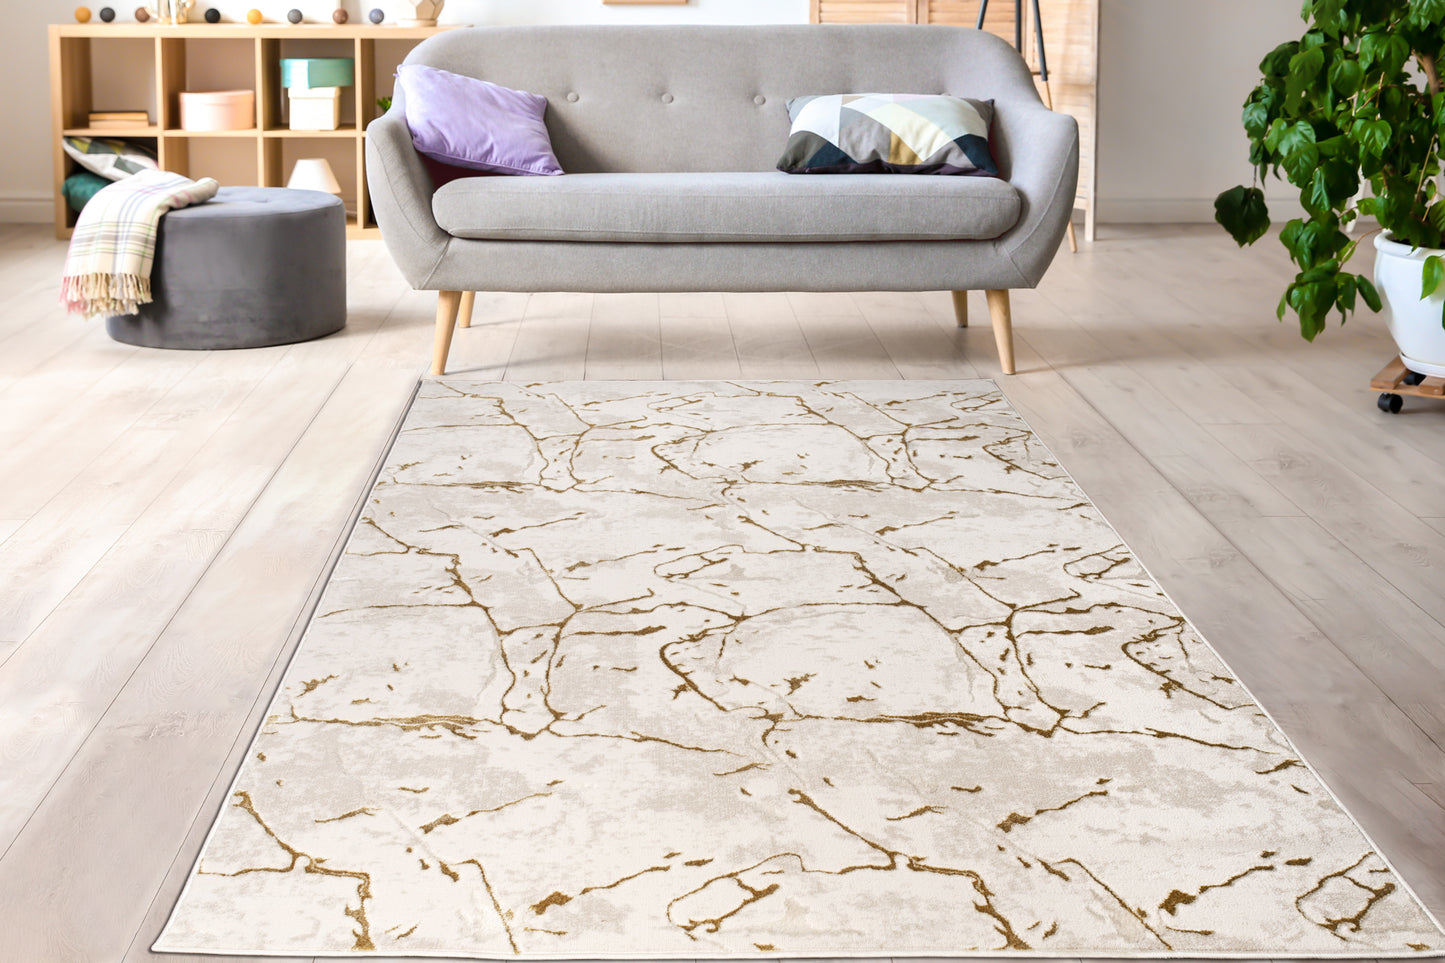 LaDole Rugs Abstract Modern Minimalist Contemporary Rug - Luxury Premium Carpet for Living Room, Bedroom, Office, Entrance, and Hallway - Gold and Beige